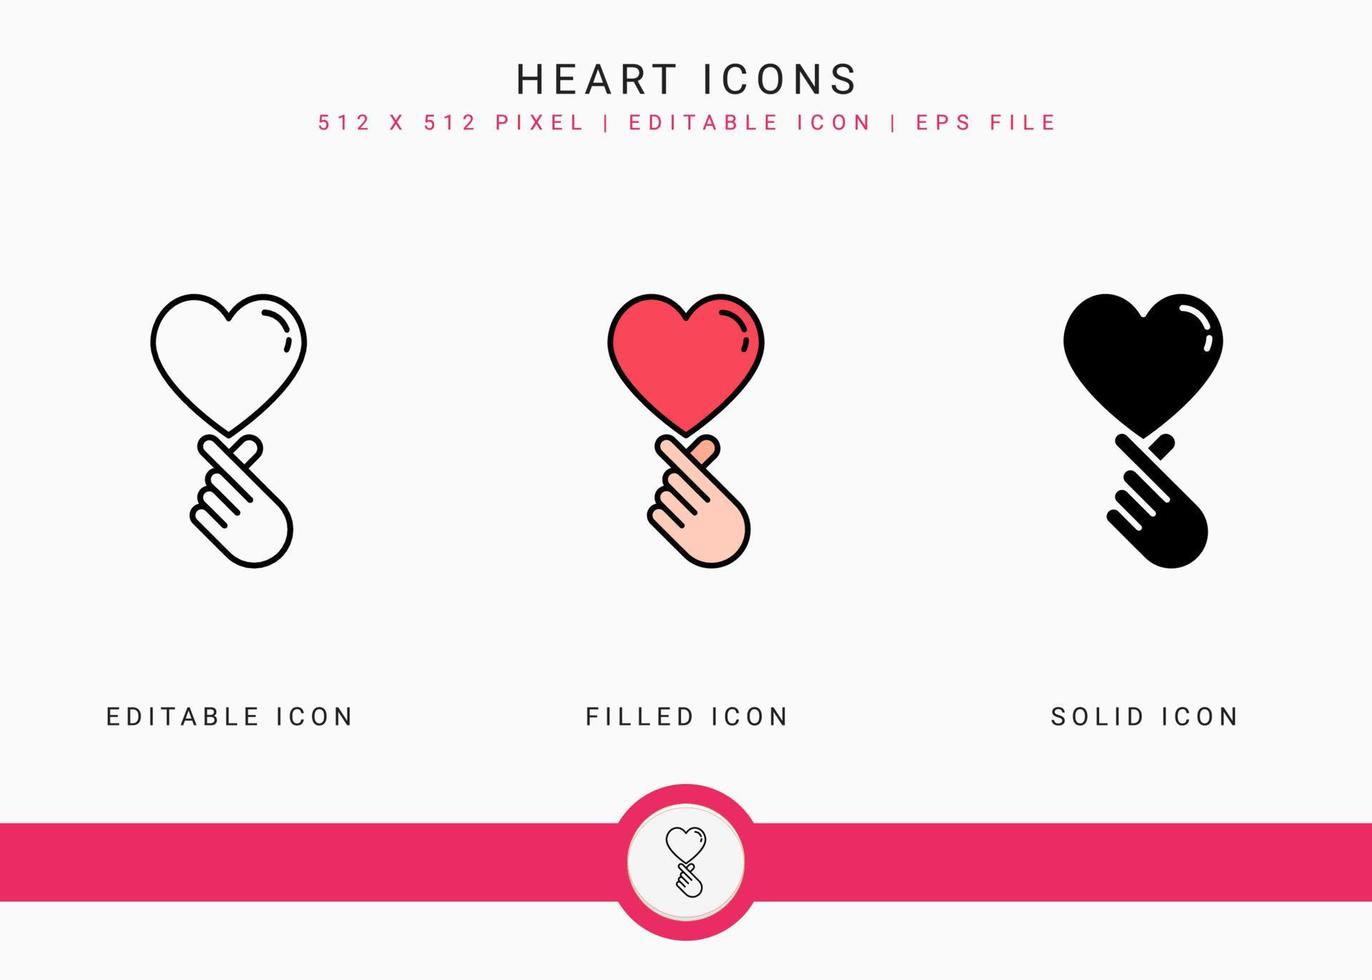 Heart icons set vector illustration with solid icon line style. Wedding love romance concept. Editable stroke icon on isolated background for web design, user interface, and mobile application